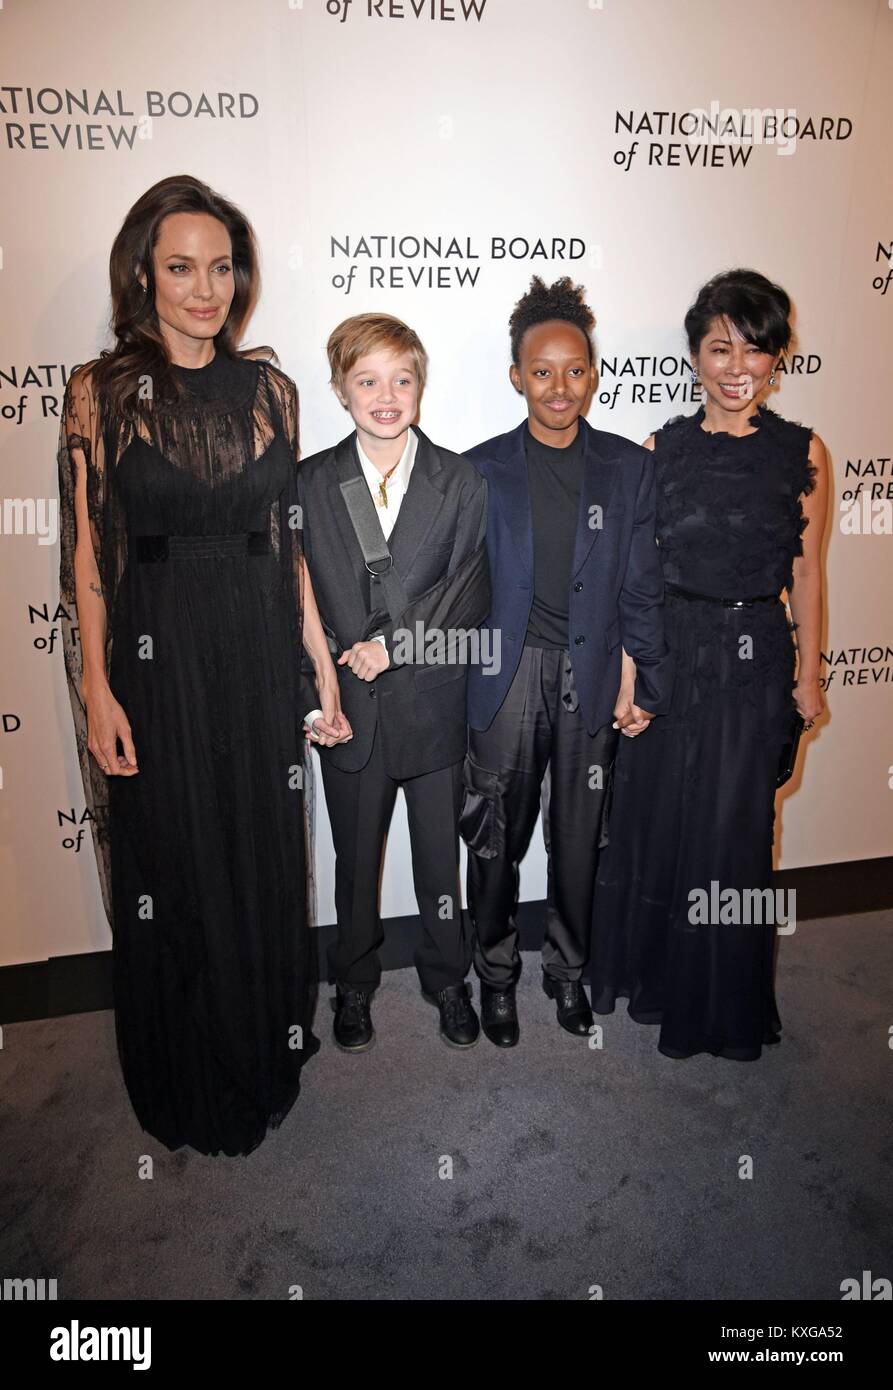 New York, NY, USA. 9th Jan, 2018. Angelina Jolie, Shiloh Nouvel Jolie-Pitt, Zahara Jolie-Pitt, Loung Ung at arrivals for The National Board of Review Awards 2018, Cipriani 42nd Street, New York, NY January 9, 2018. Credit: Derek Storm/Everett Collection/Alamy Live News Stock Photo